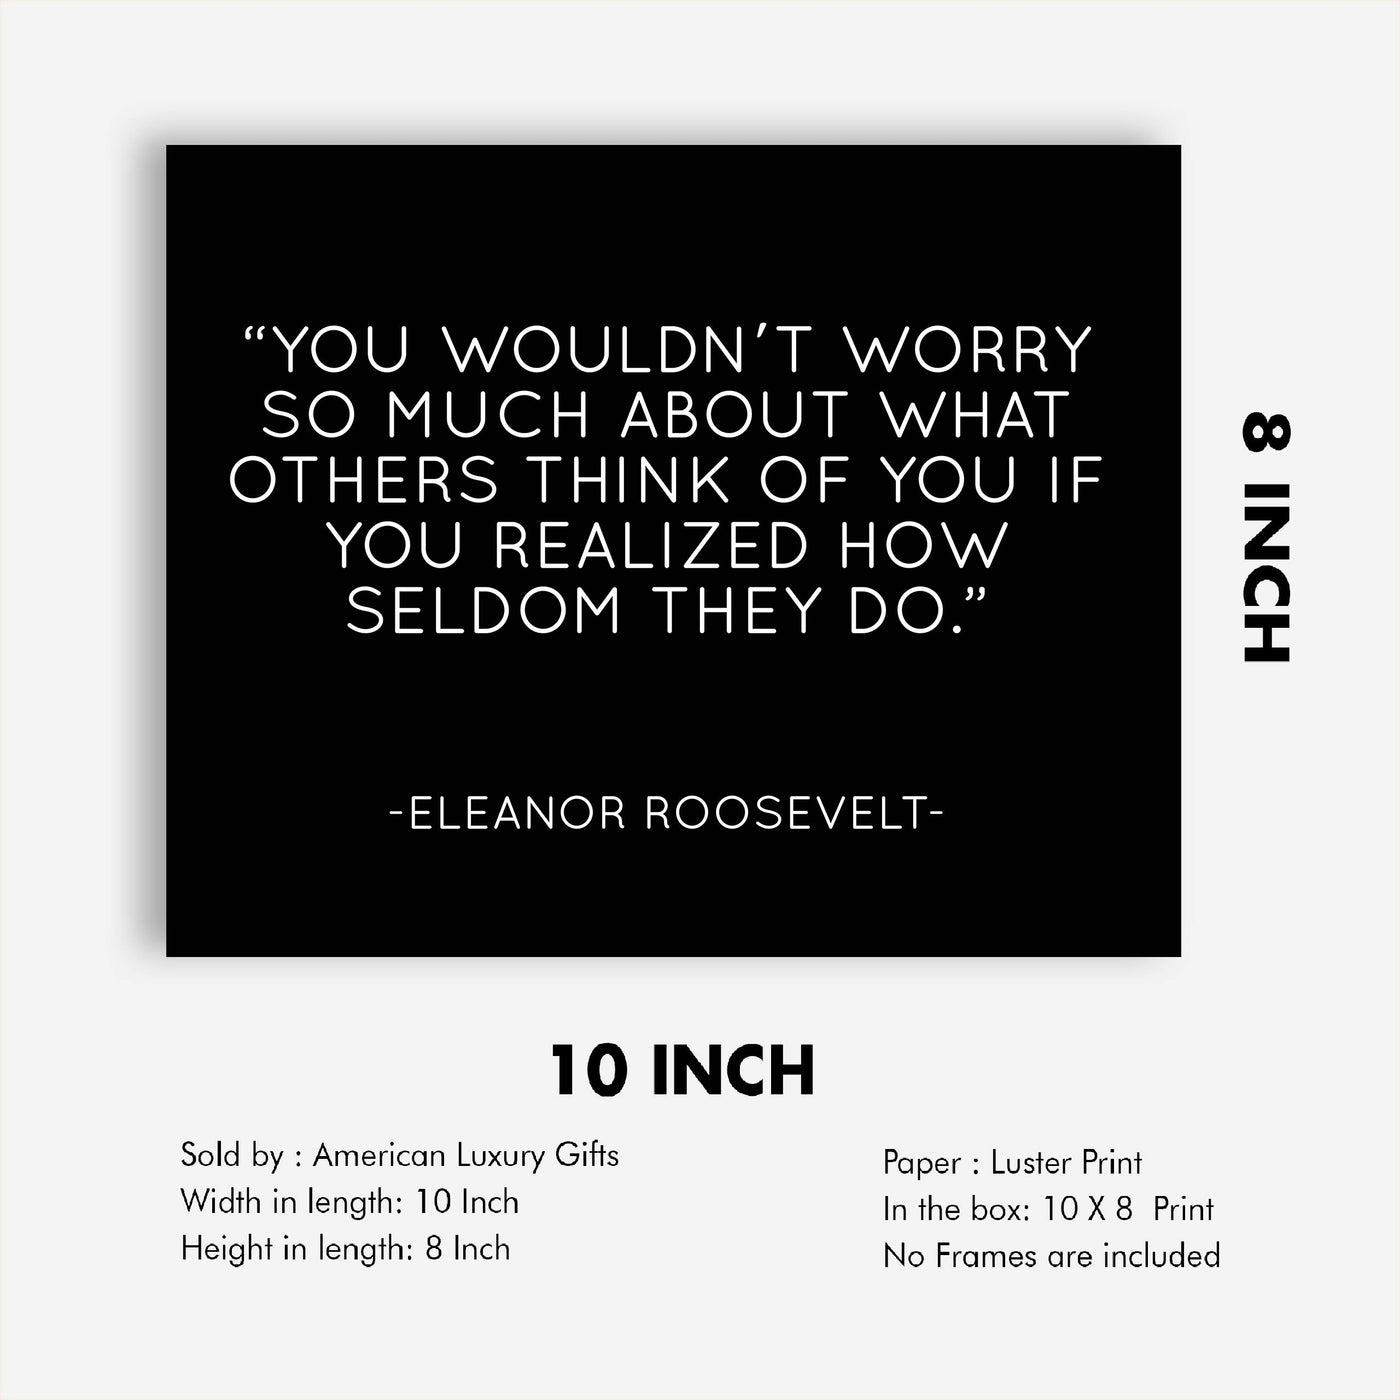 Eleanor Roosevelt Quotes Wall Art-"You Wouldn't Worry About What Others Think"-10 x 8" Modern Typographic Wall Print-Ready to Frame. Inspirational Home-Office-School-Library Decor. Great Advice!